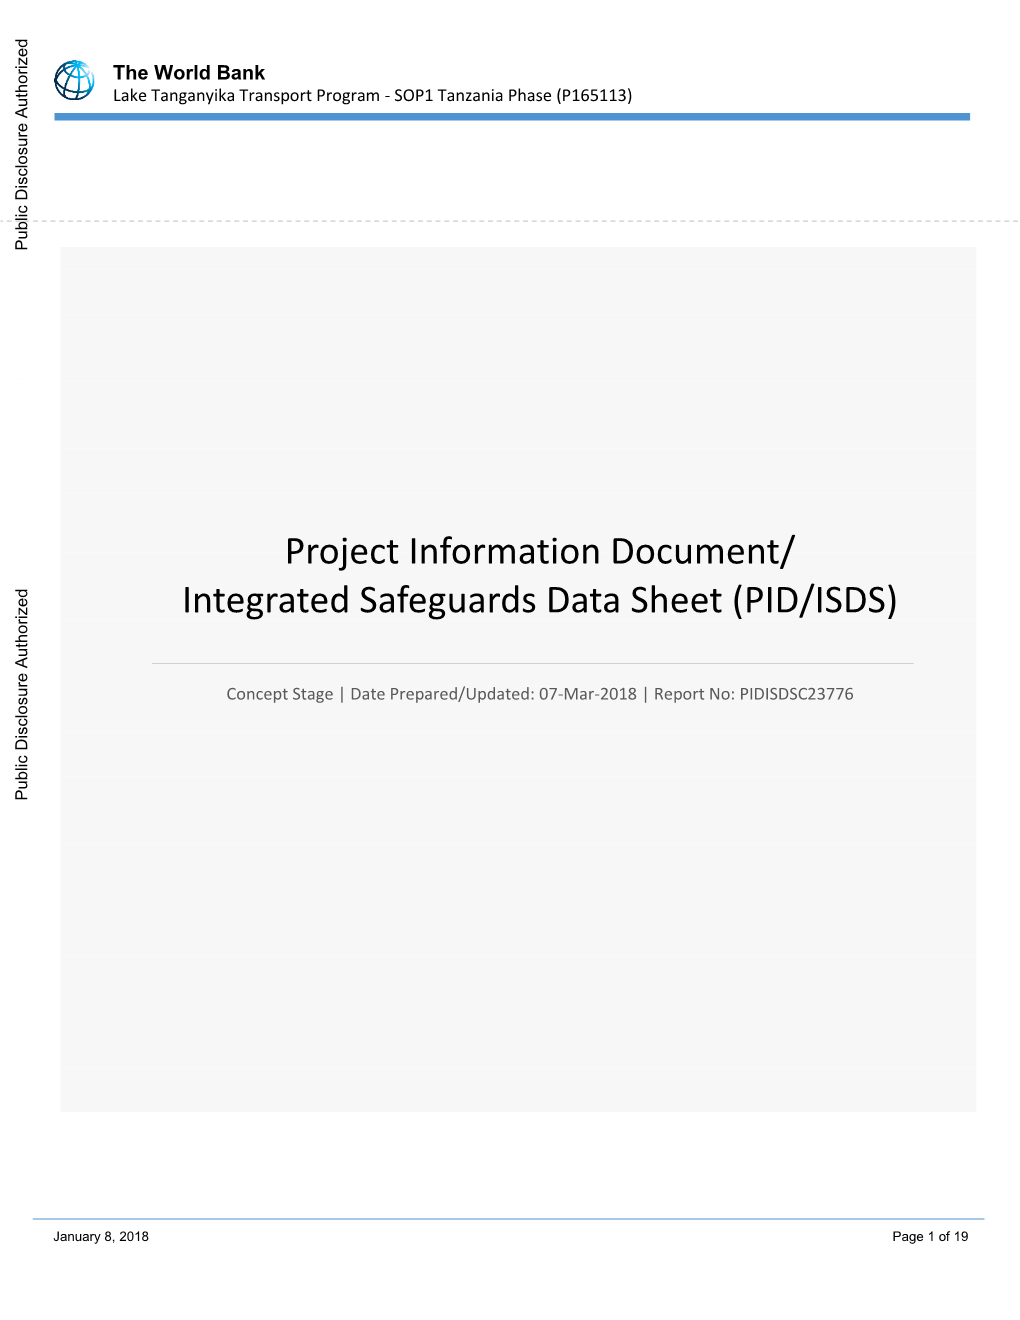 Concept-Project-Information-Document-Integrated-Safeguards-Data-Sheet.Pdf